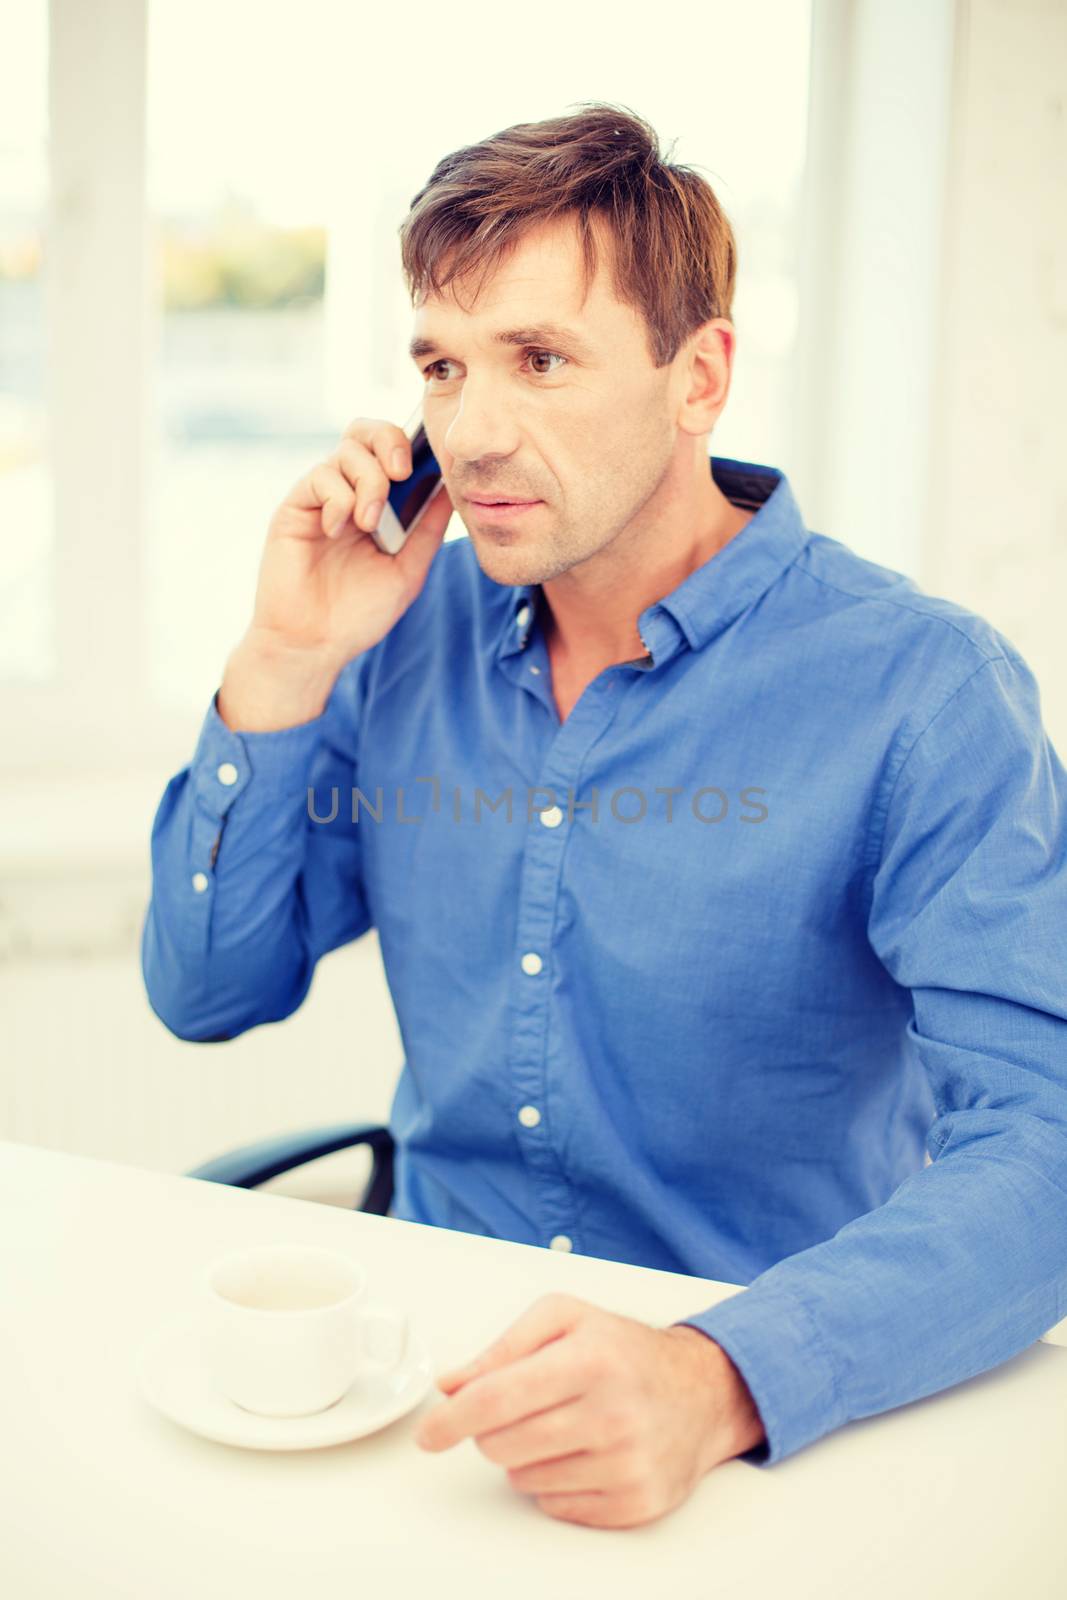 business, communication, modern technology concept - buisnessman with cell phone and cup of coffee